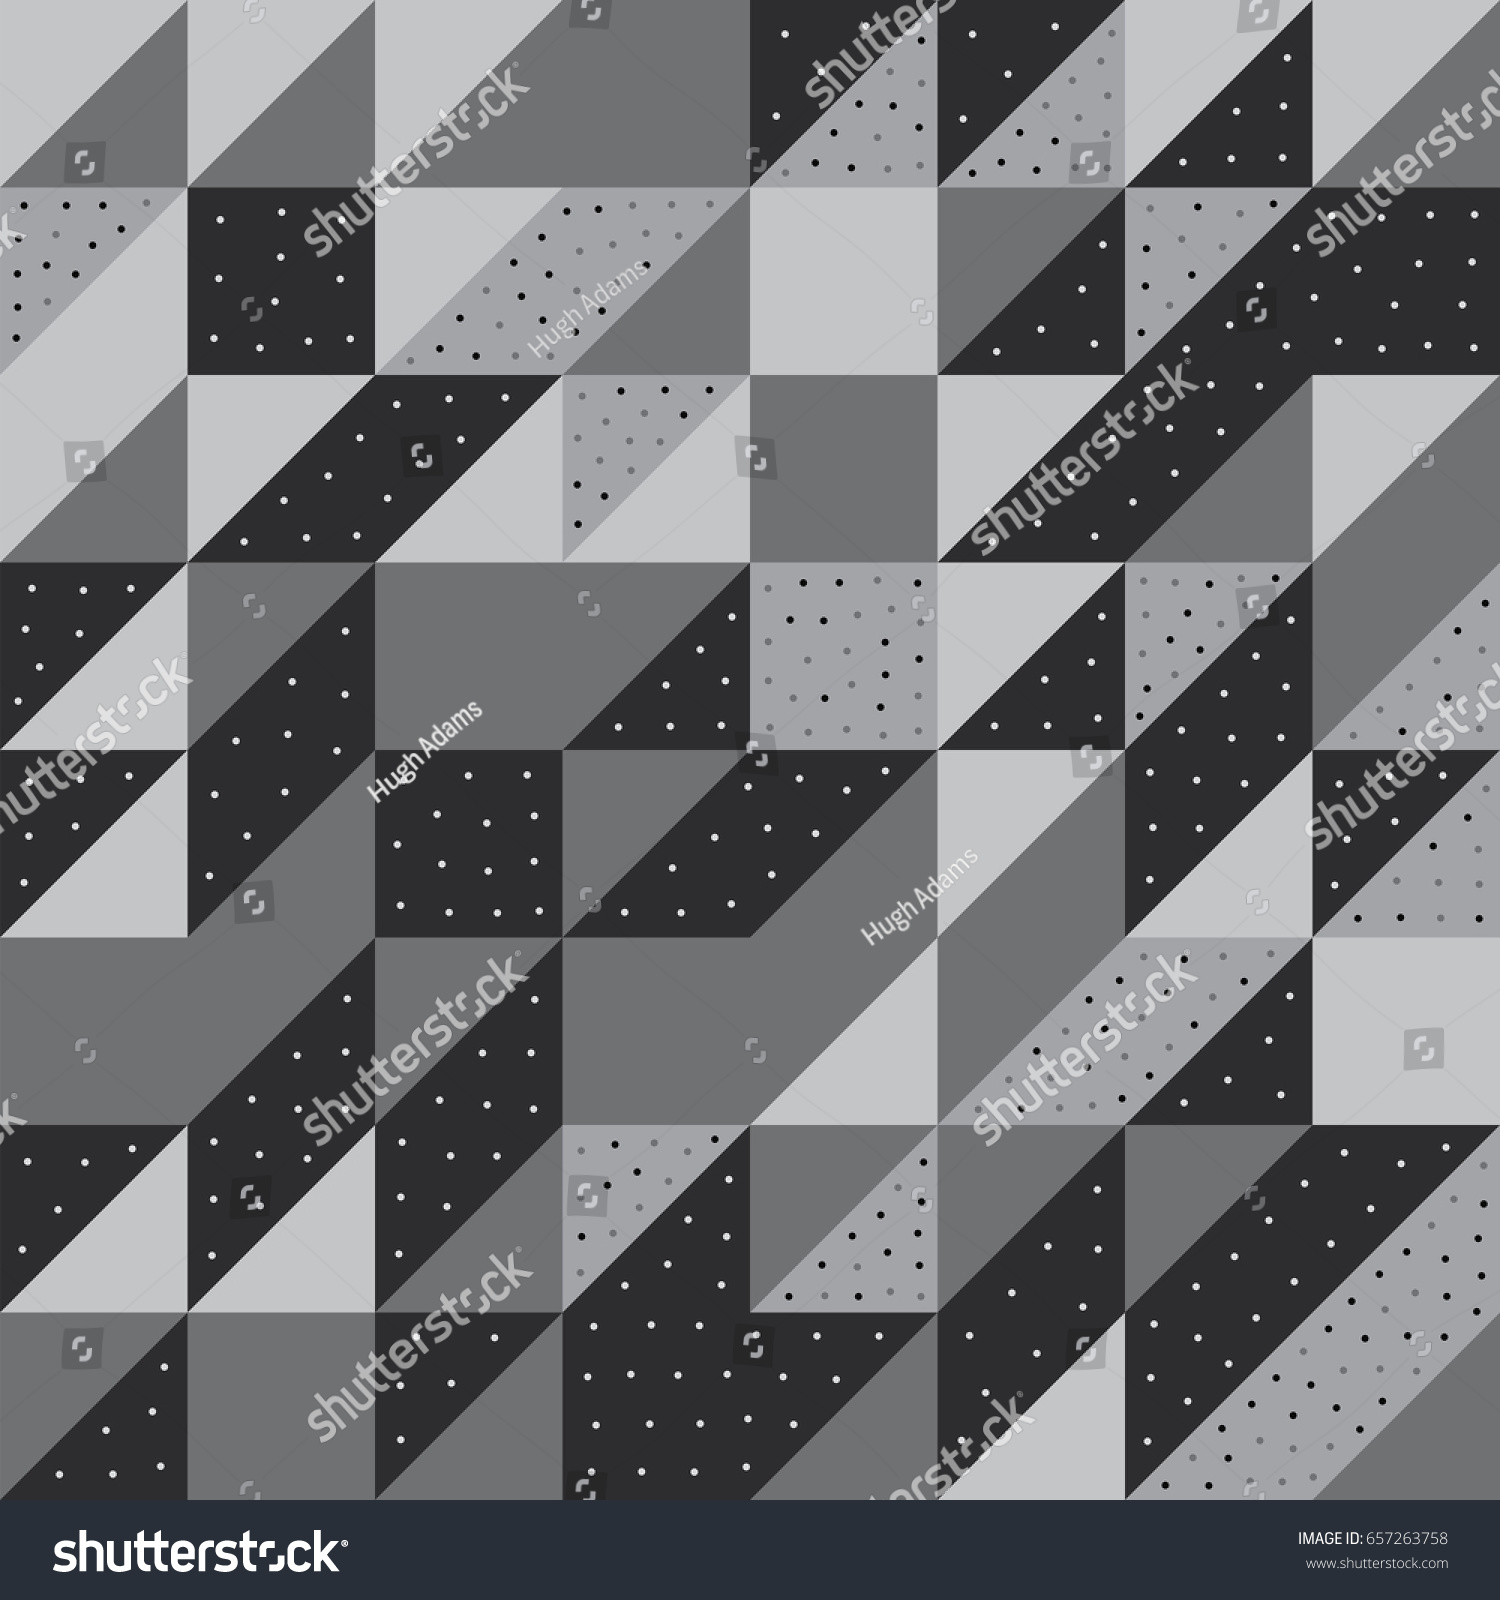 SVG of geometric repeating vector pattern tile svg